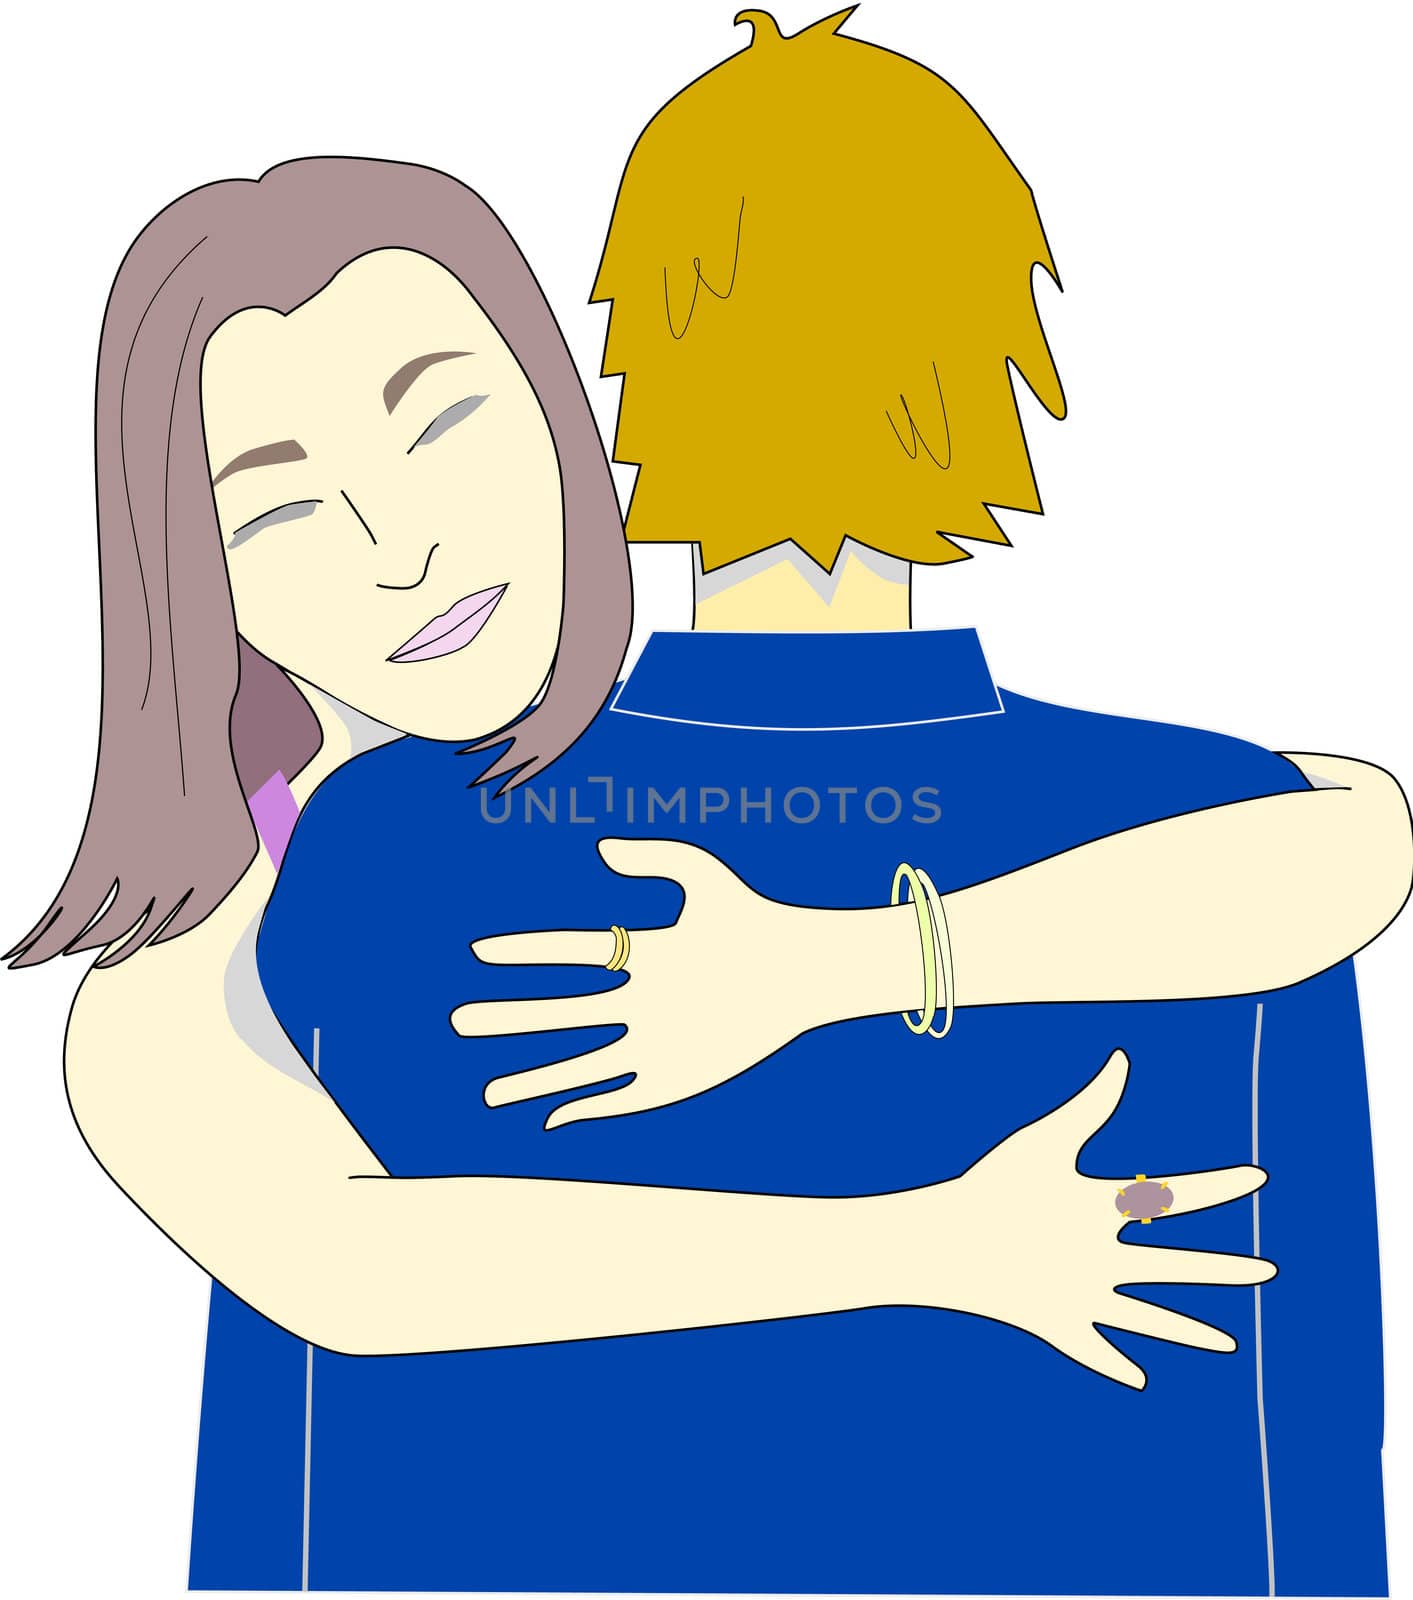 Young woman hugs a man that could be her friend, partner or work colleague.